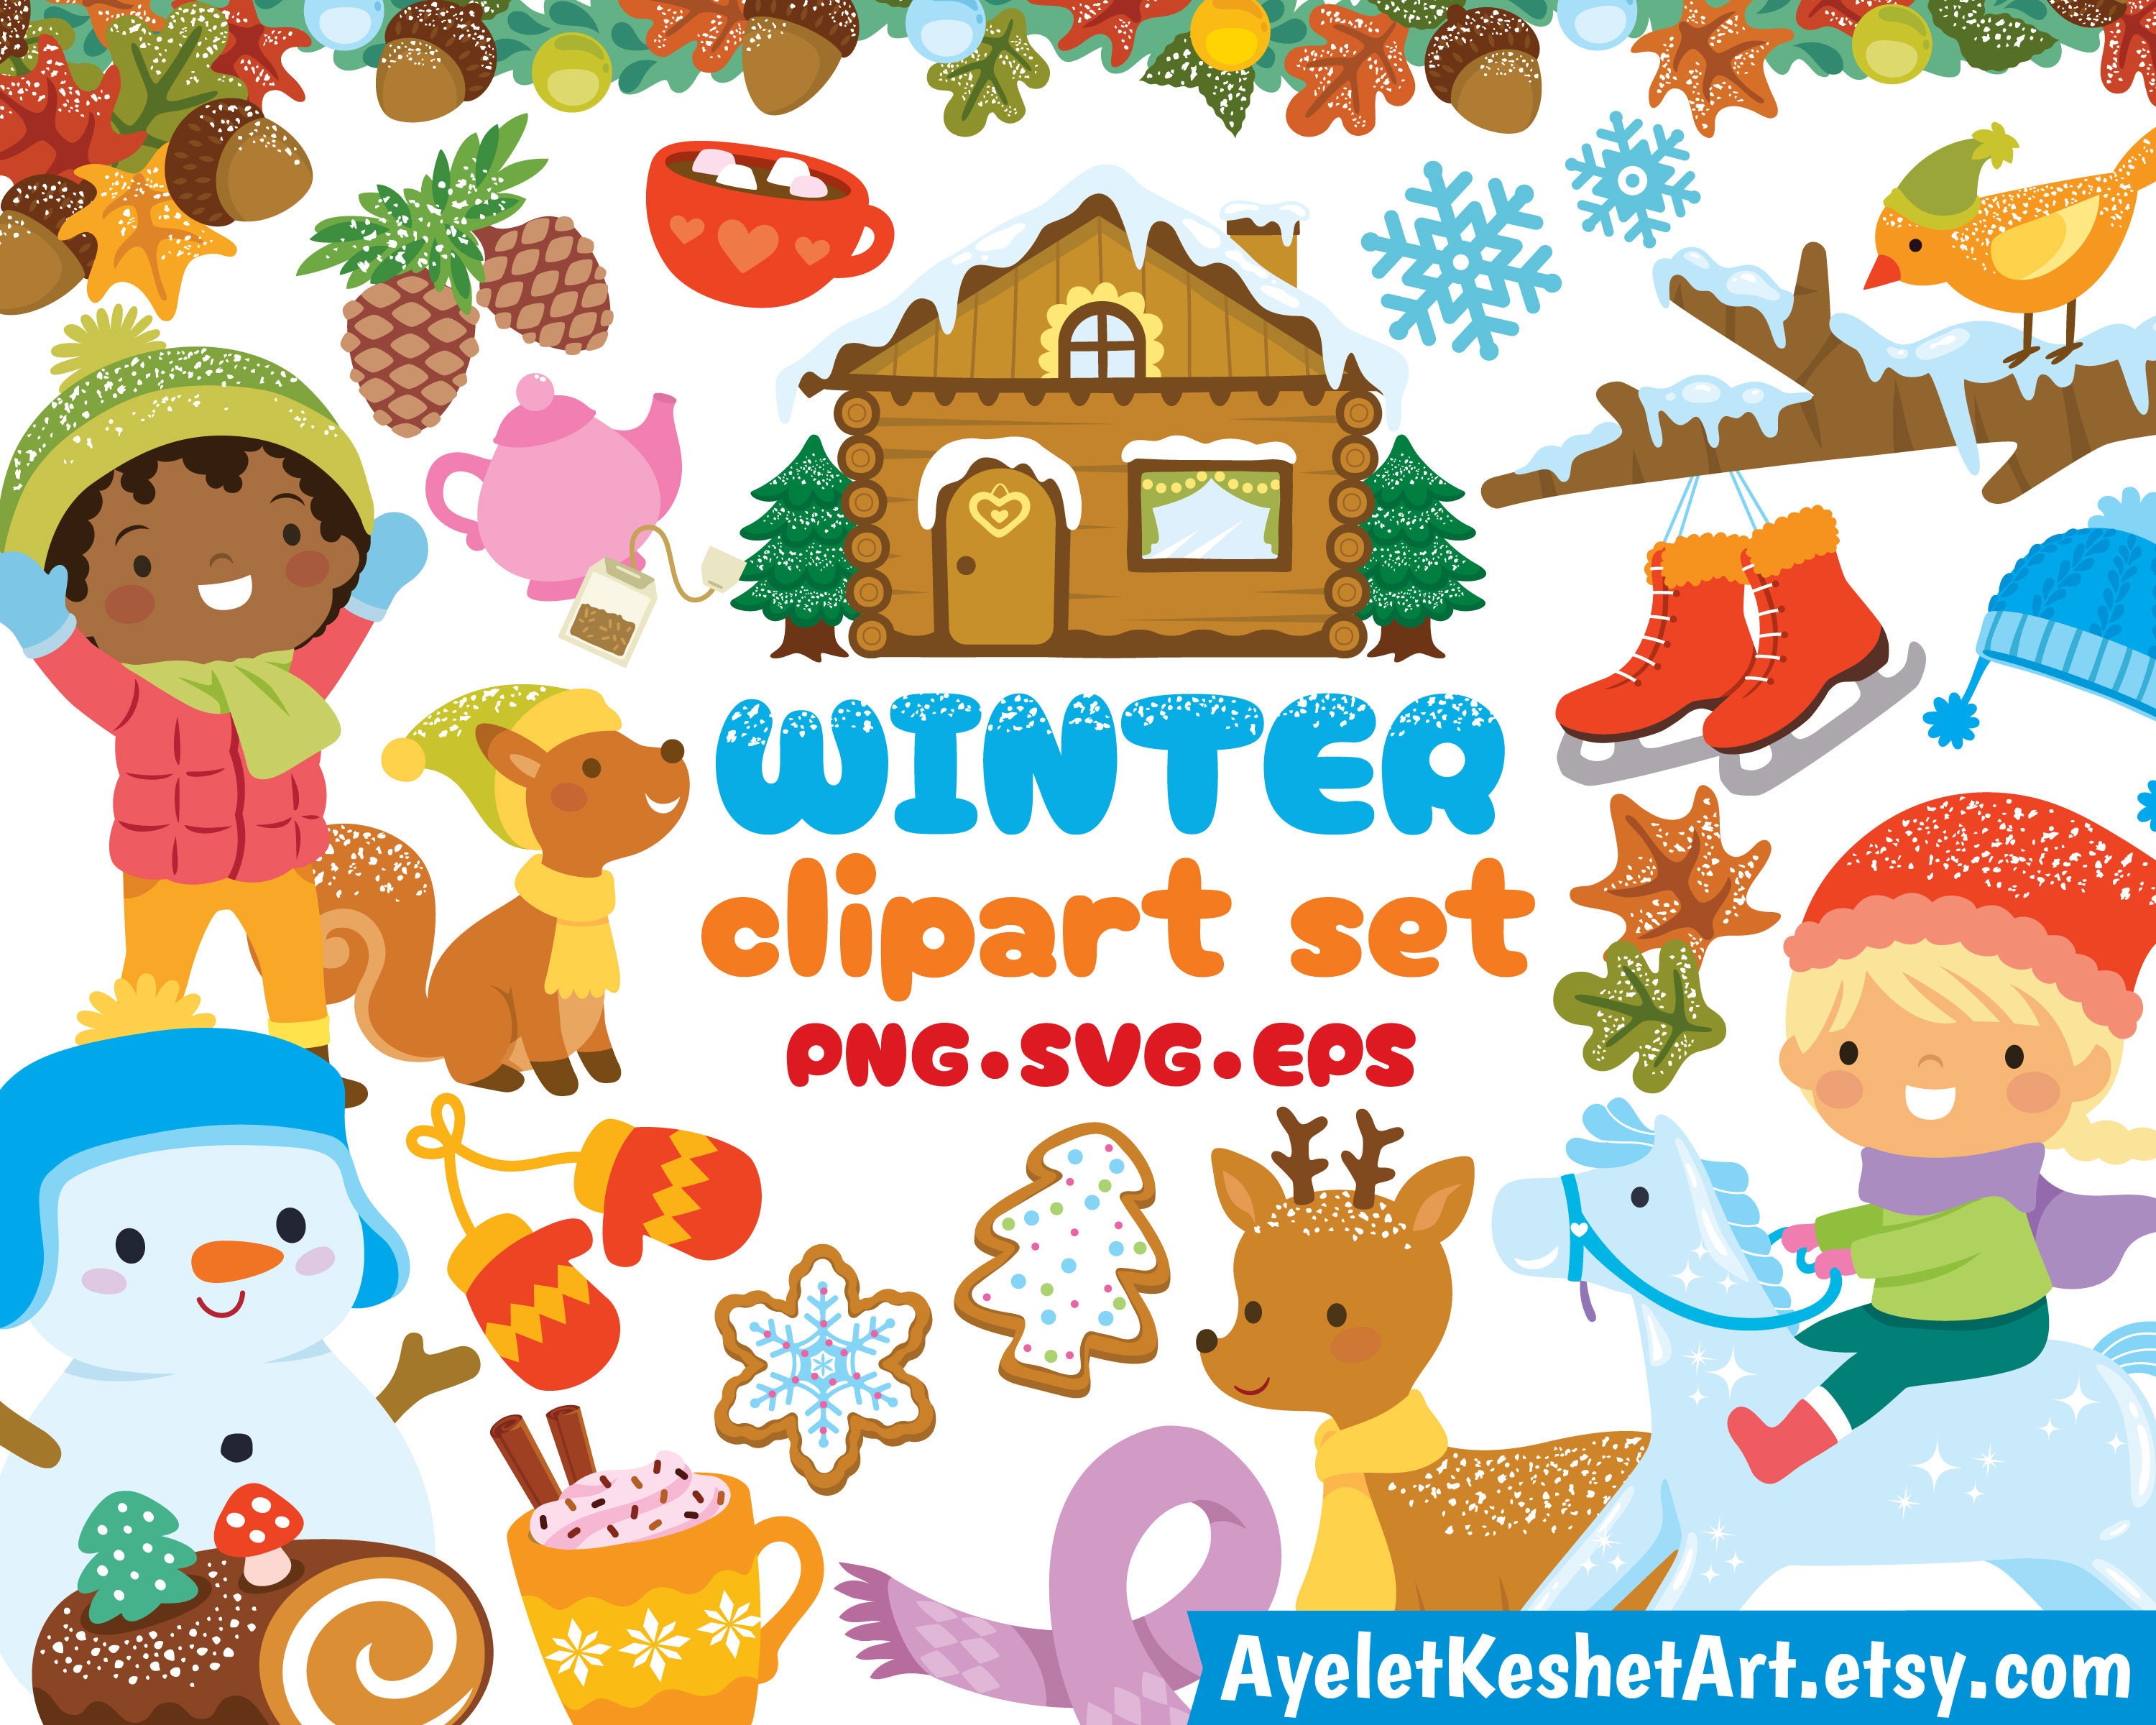 Cute Winter Clipart Bundle, Kawaii Snowy Images, Adorable Frosty Designs,  Sweet Winter Clipart, Instant Download, 300 DPI Transparent PNG 